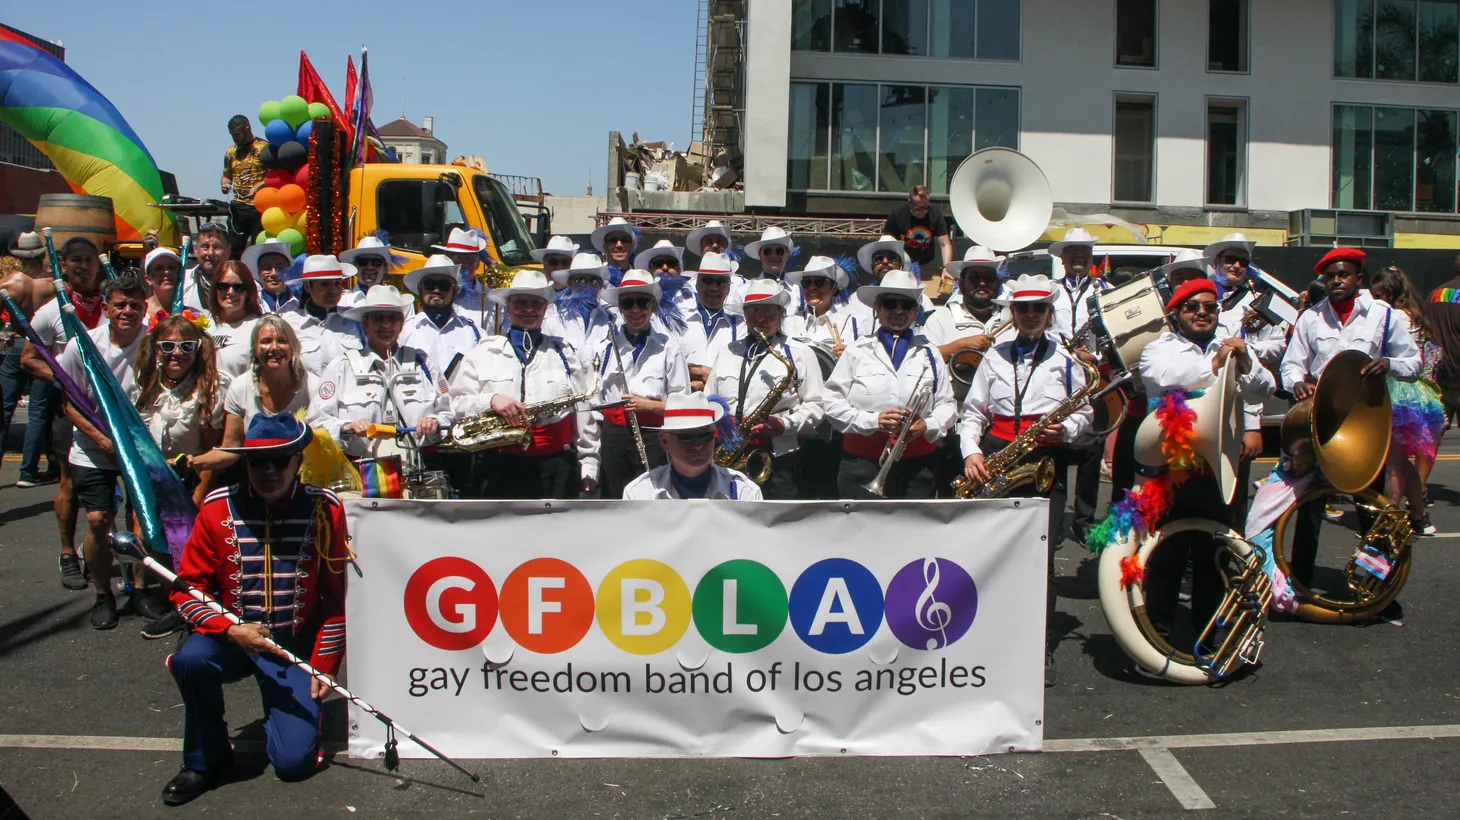 The Los Angeles Gay Freedom Band will be performing their latest original program “Just Cause: Music with Purpose” on November 13, highlighting causes like gun violence and civil rights.